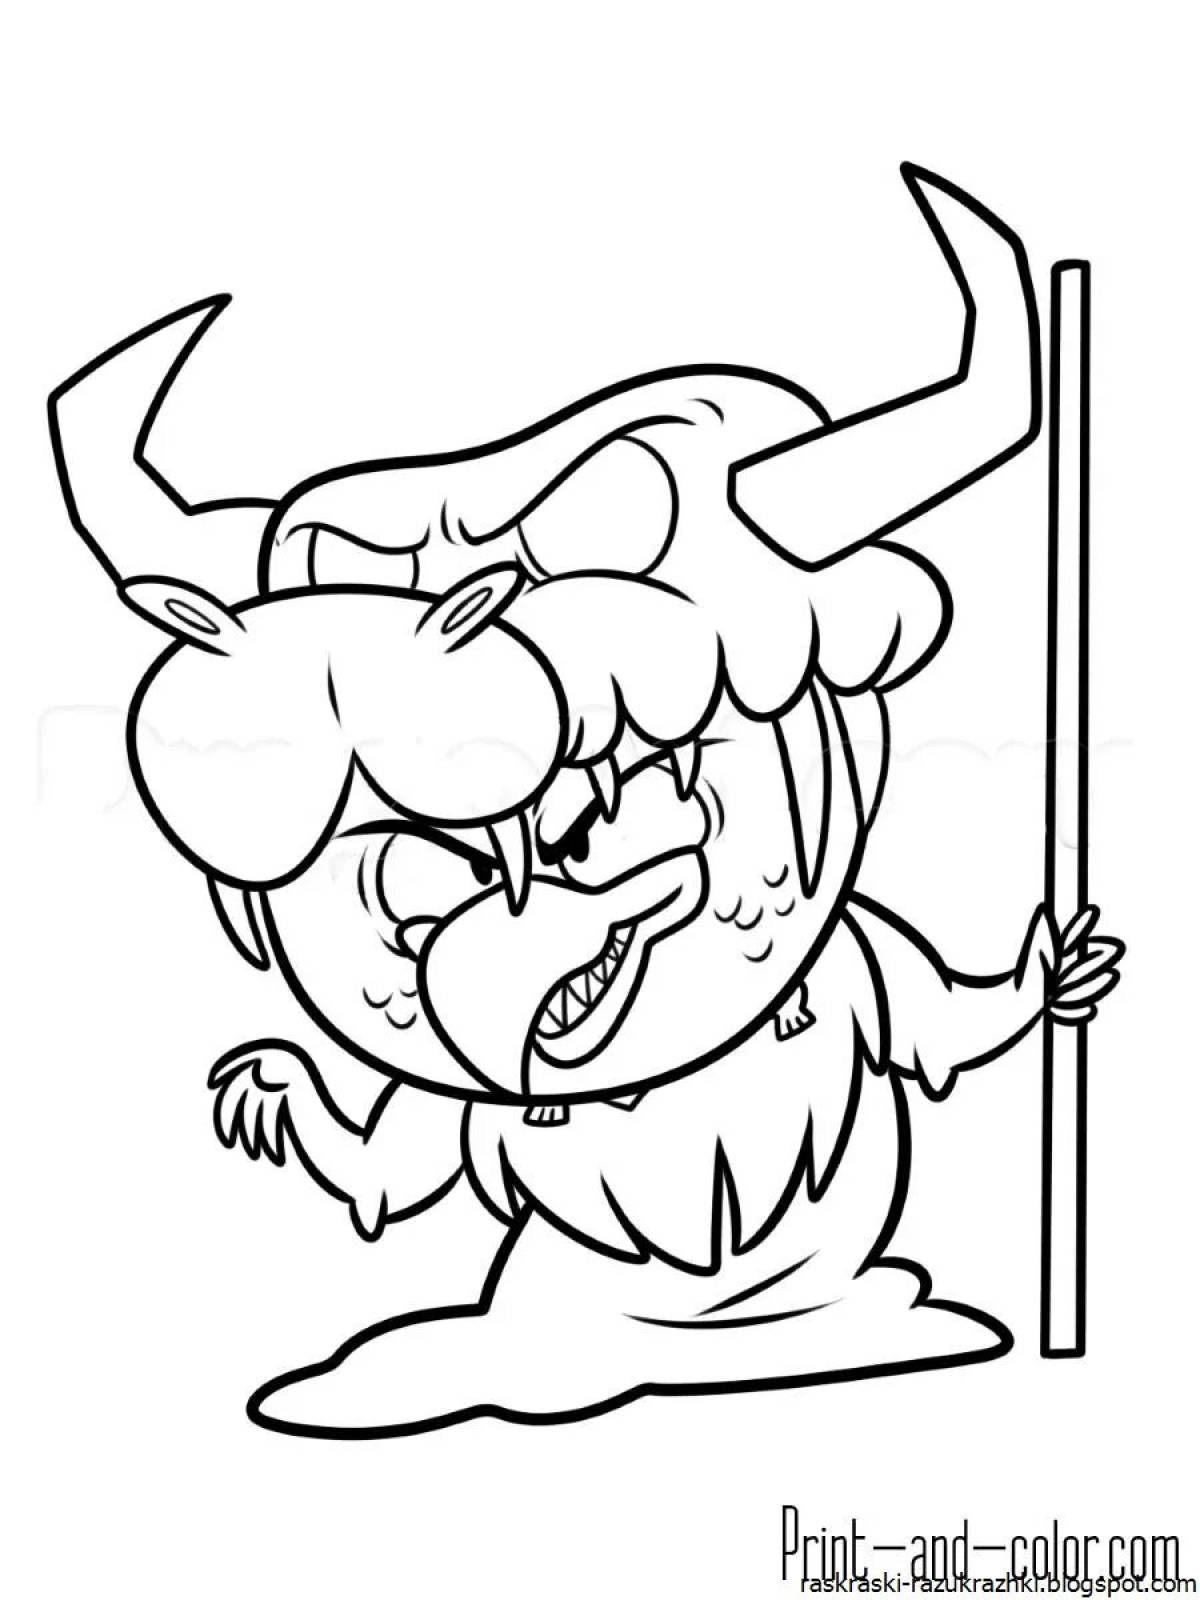 Stingy coloring page evil